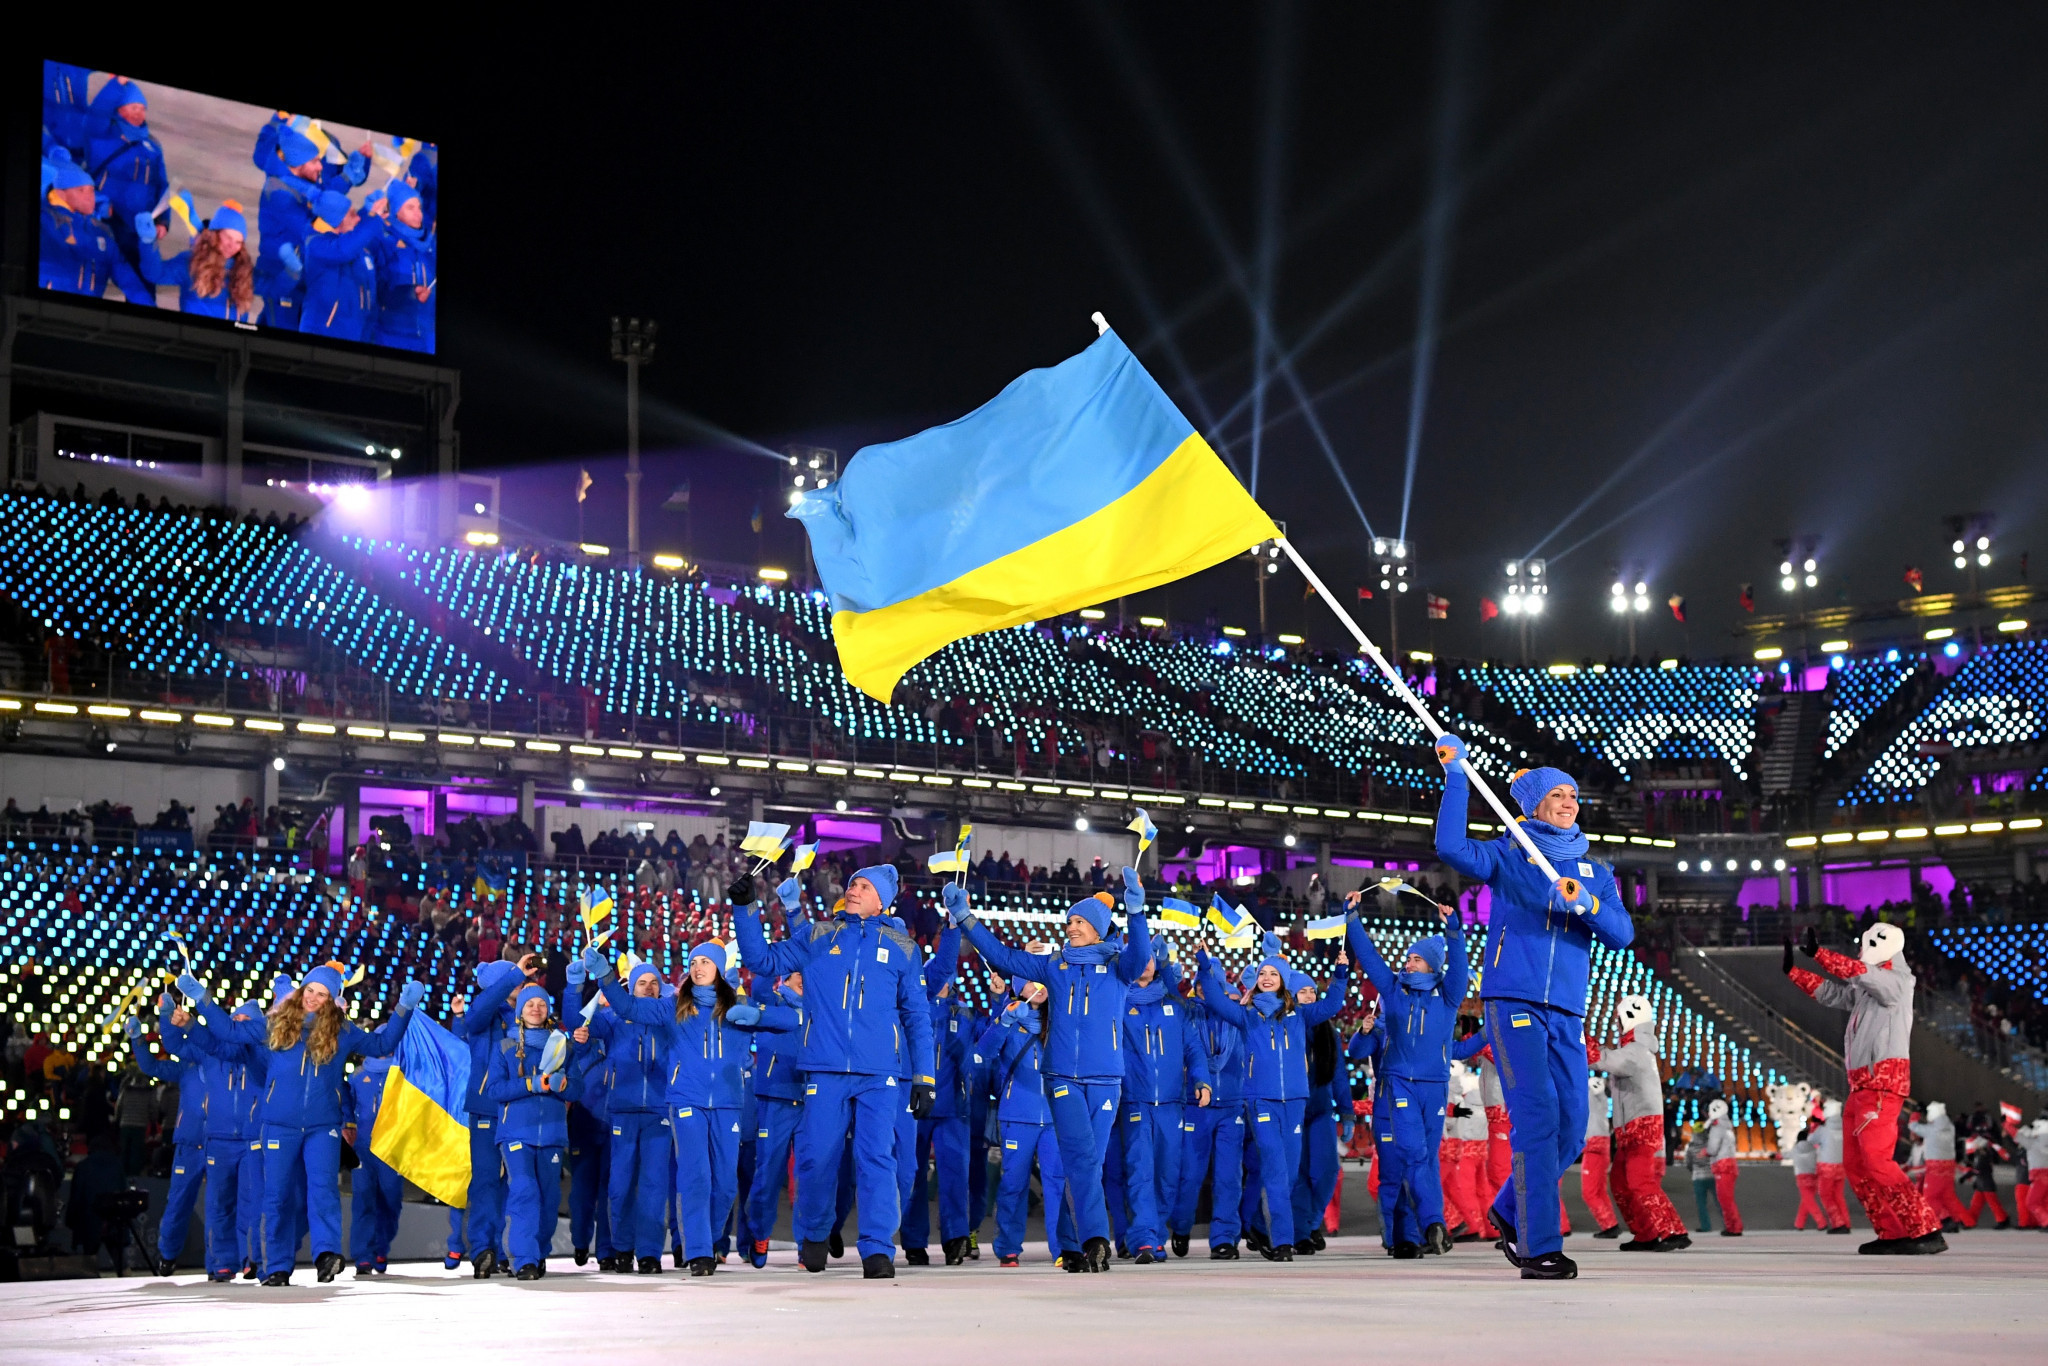 Before the full-scale Russian invasion, Ukraine had been in the process of bidding for the 2030 Winter Olympics and 2028 Winter Youth Olympic Games ©Getty Images